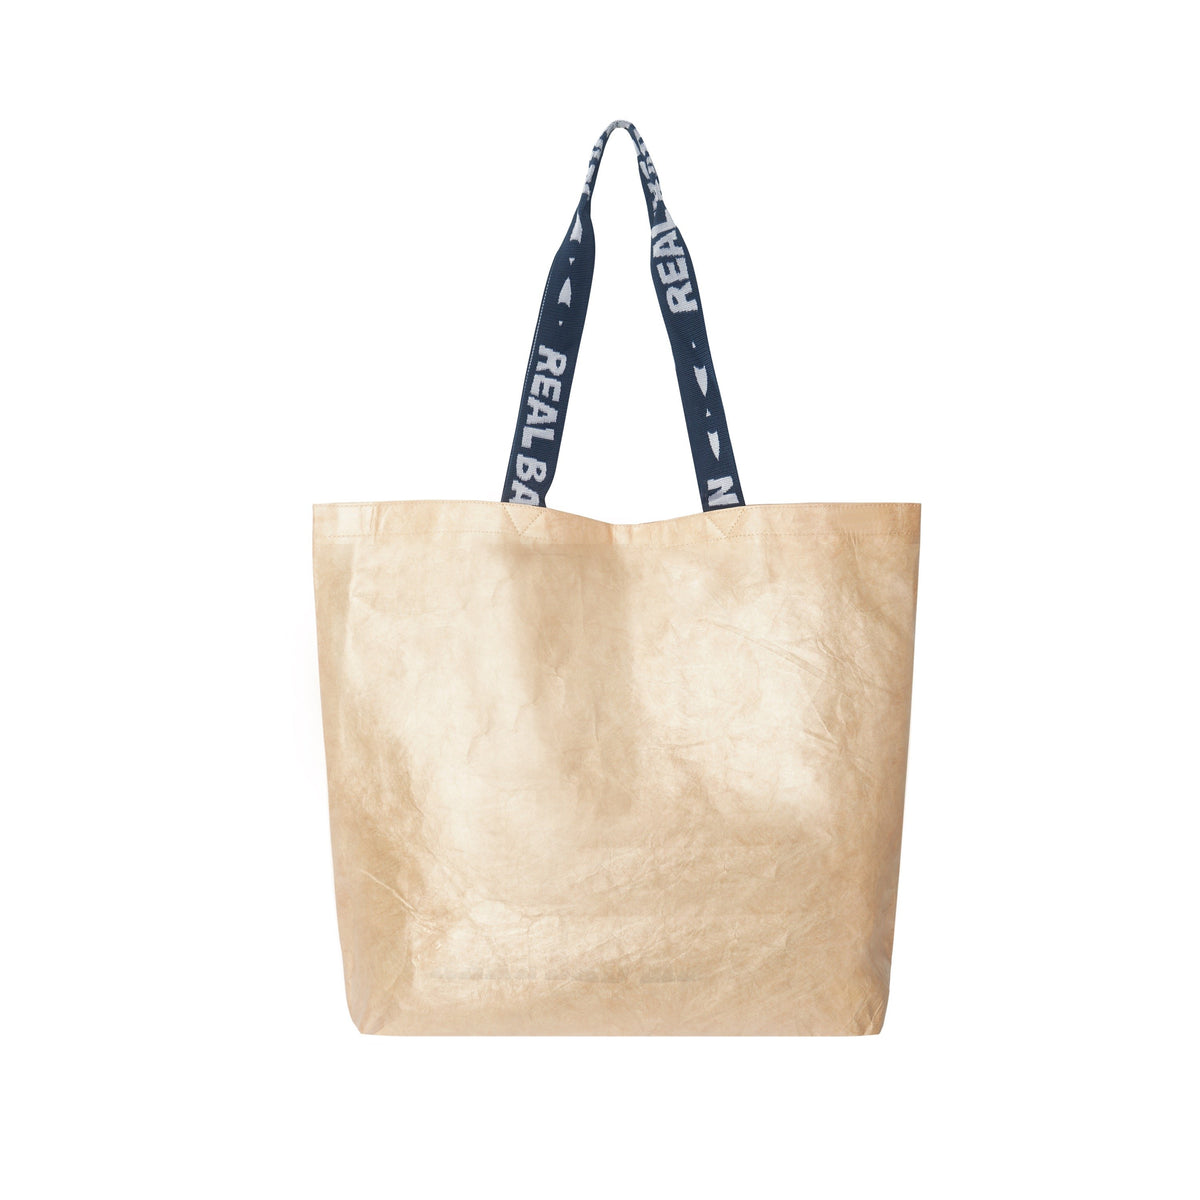 OUT OF YOUR MIND TYVEK TOTE